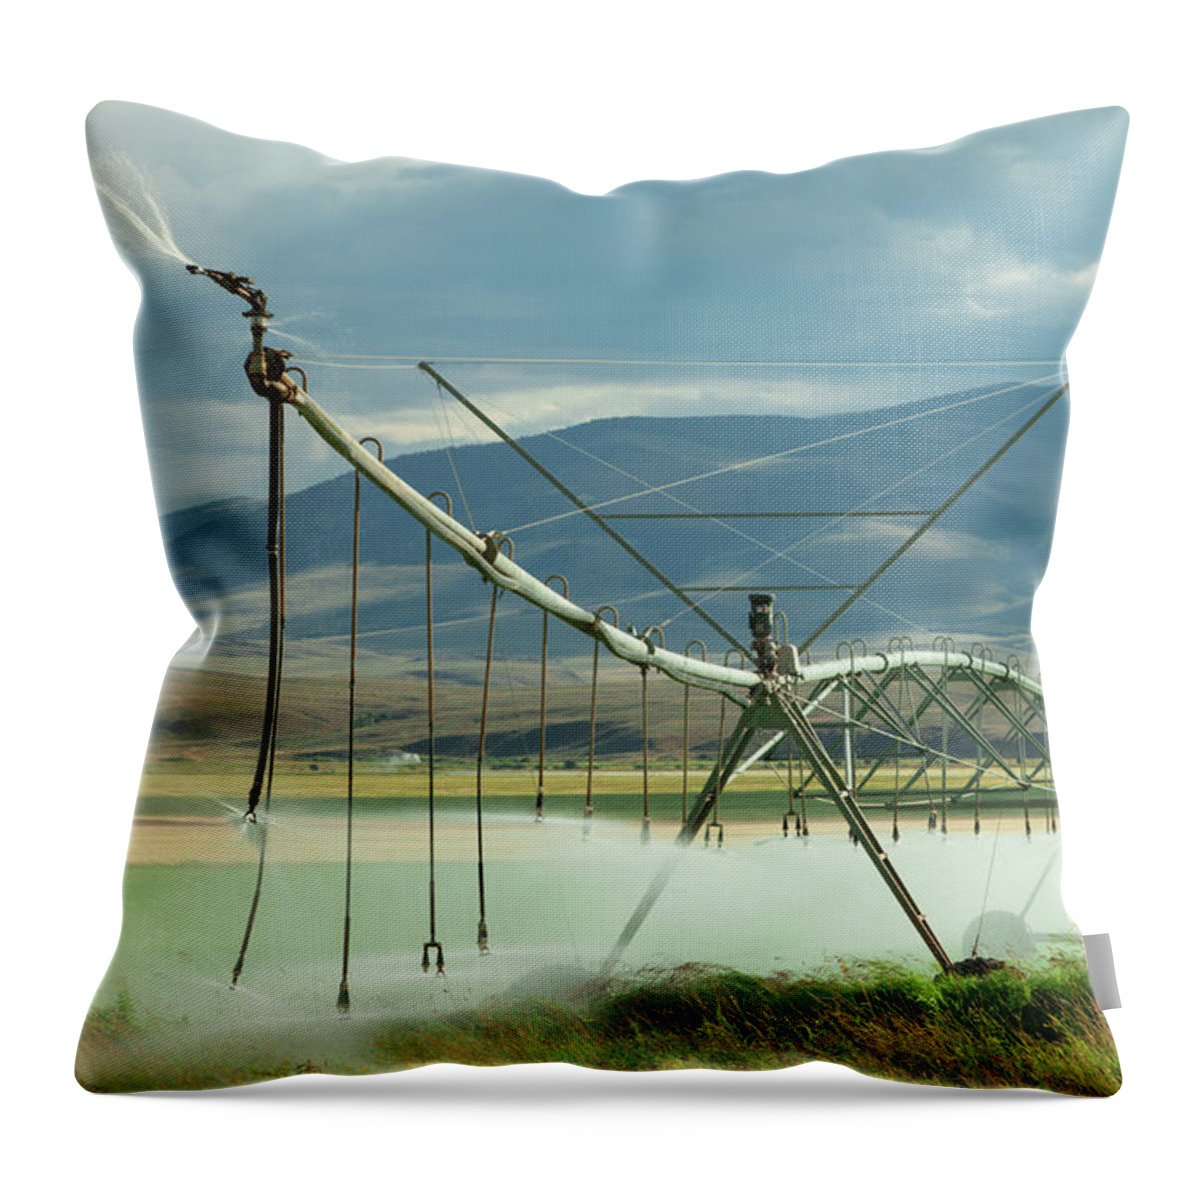 Irrigation Throw Pillow featuring the photograph Spraying Water by Todd Klassy